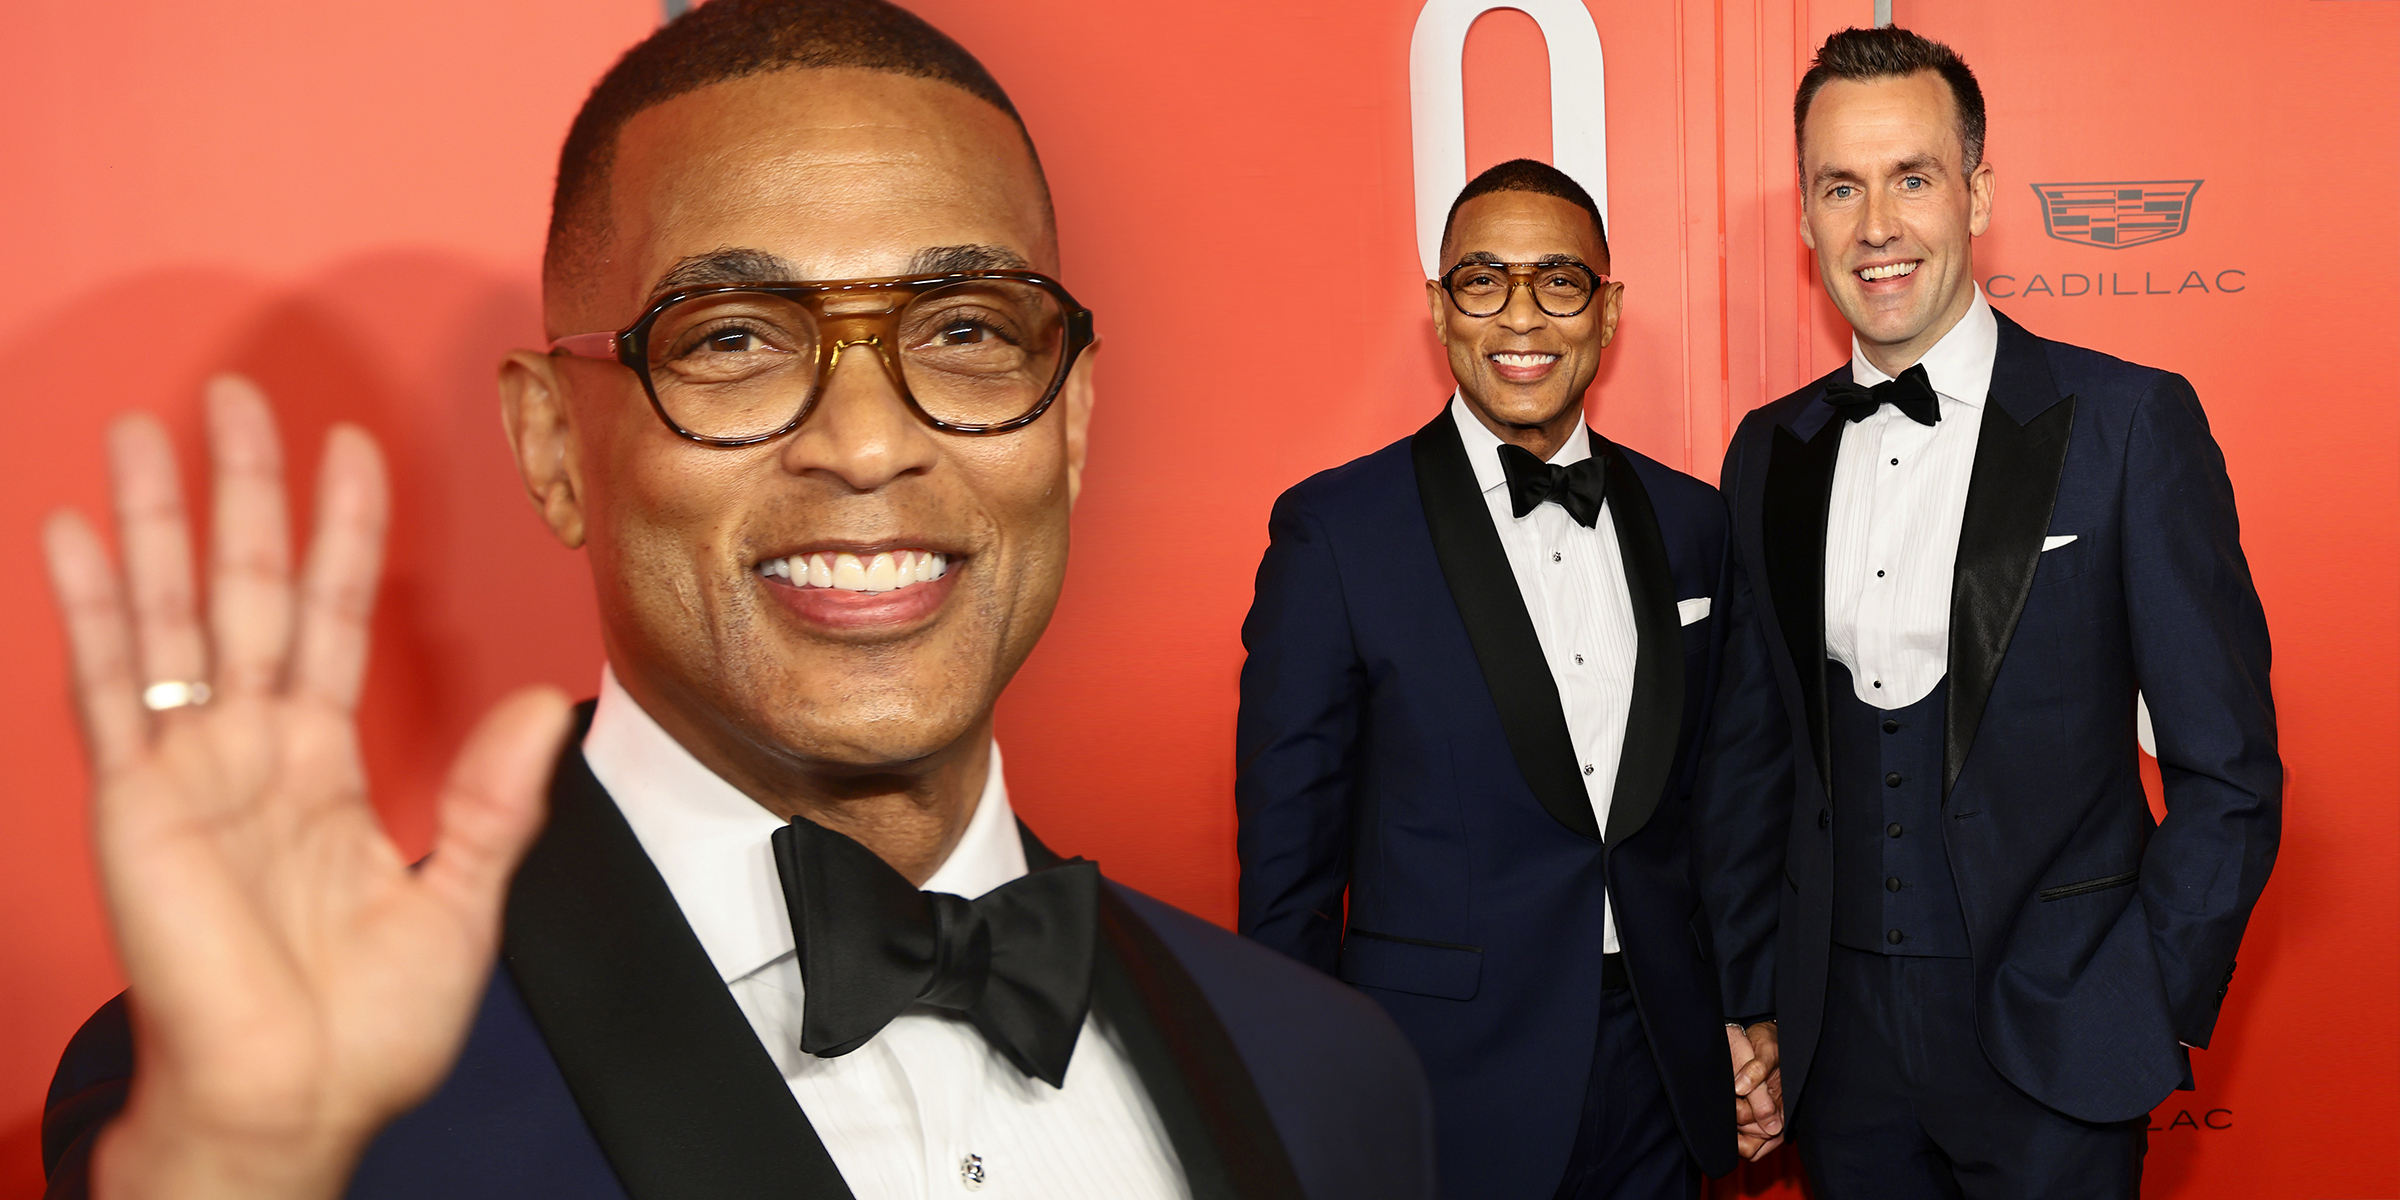 Don Lemon with his fiancé Tim Malone. | Source: Getty Images